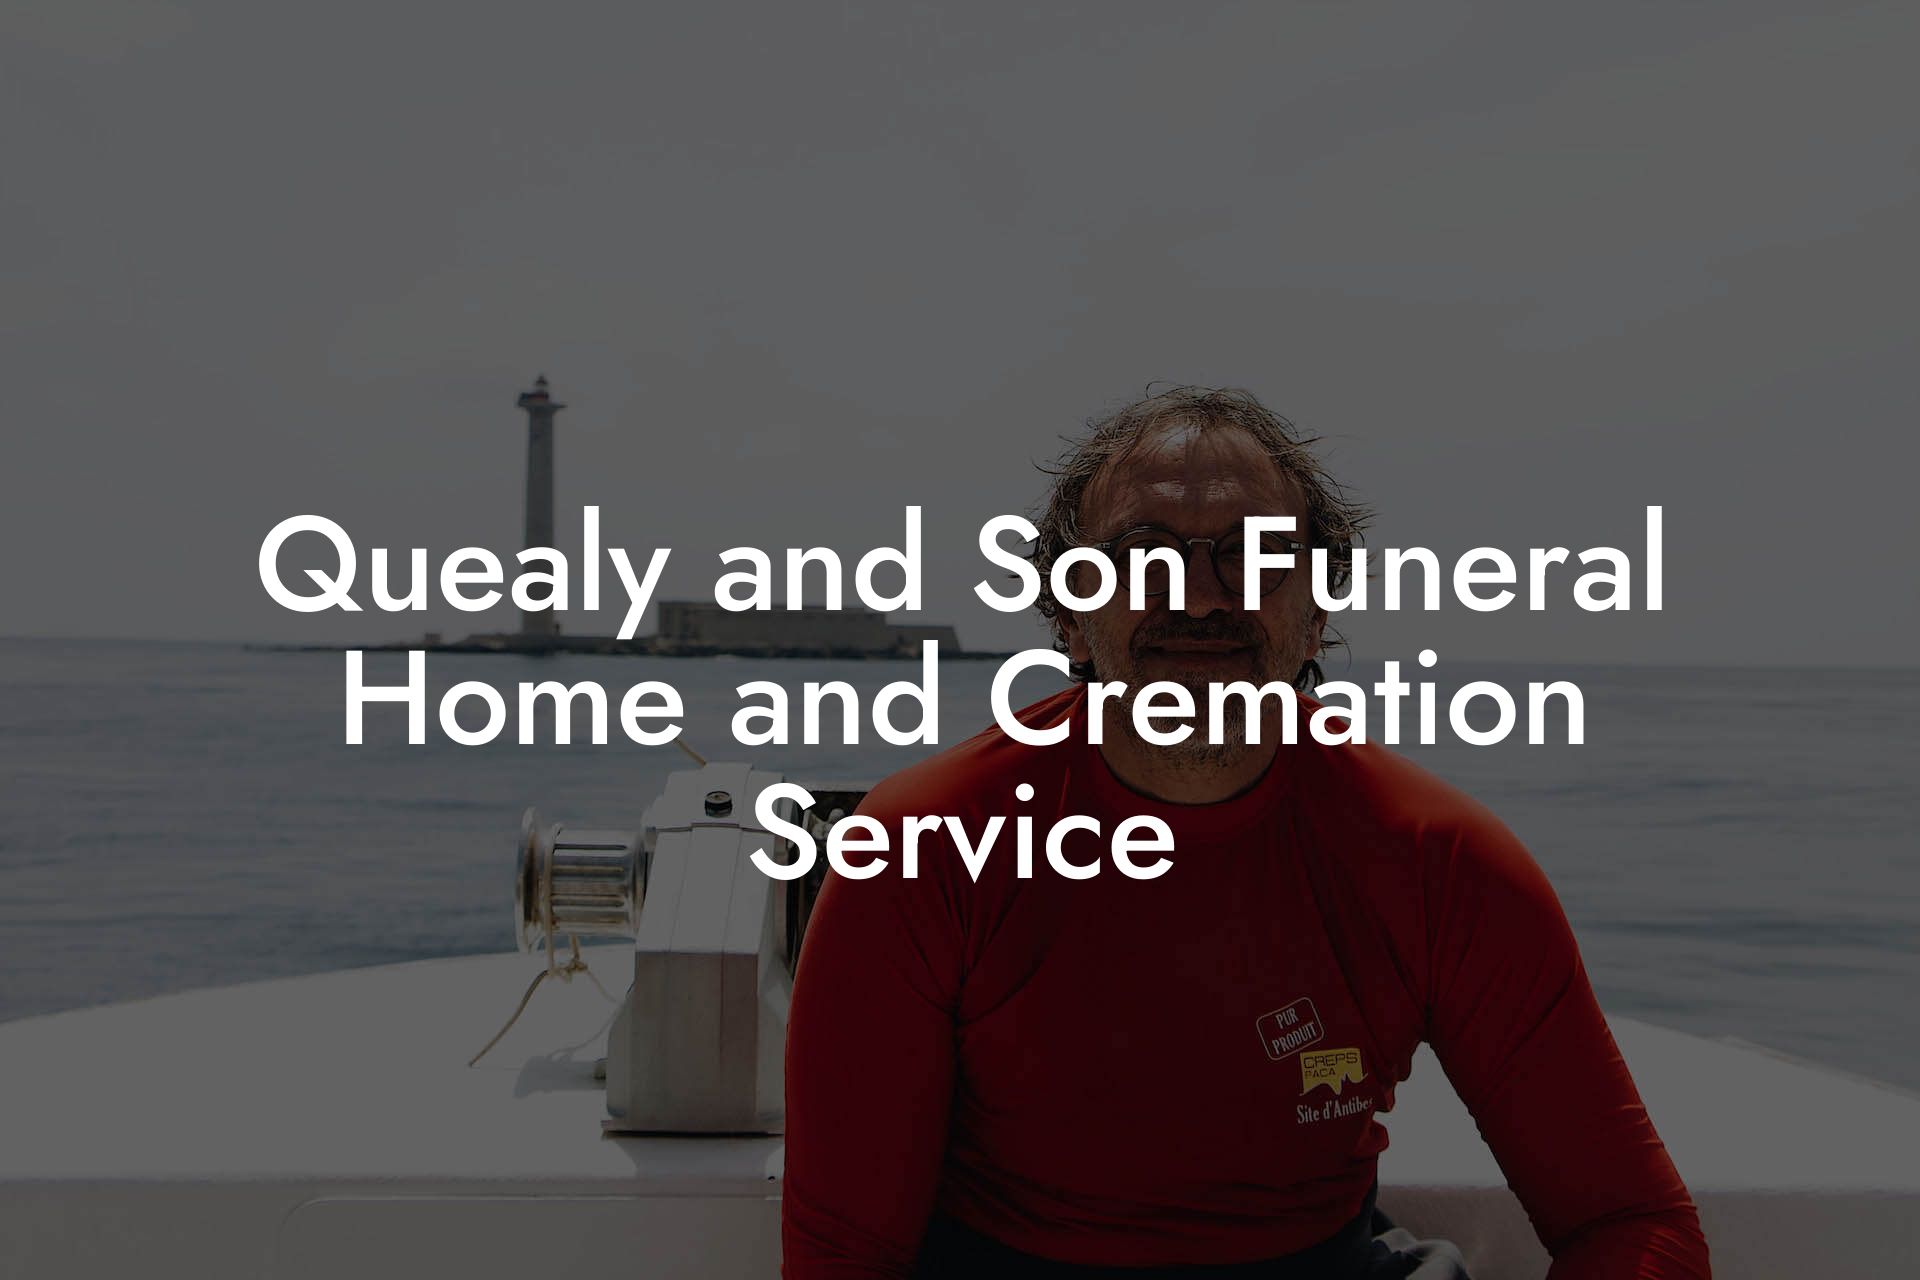 Quealy and Son Funeral Home and Cremation Service